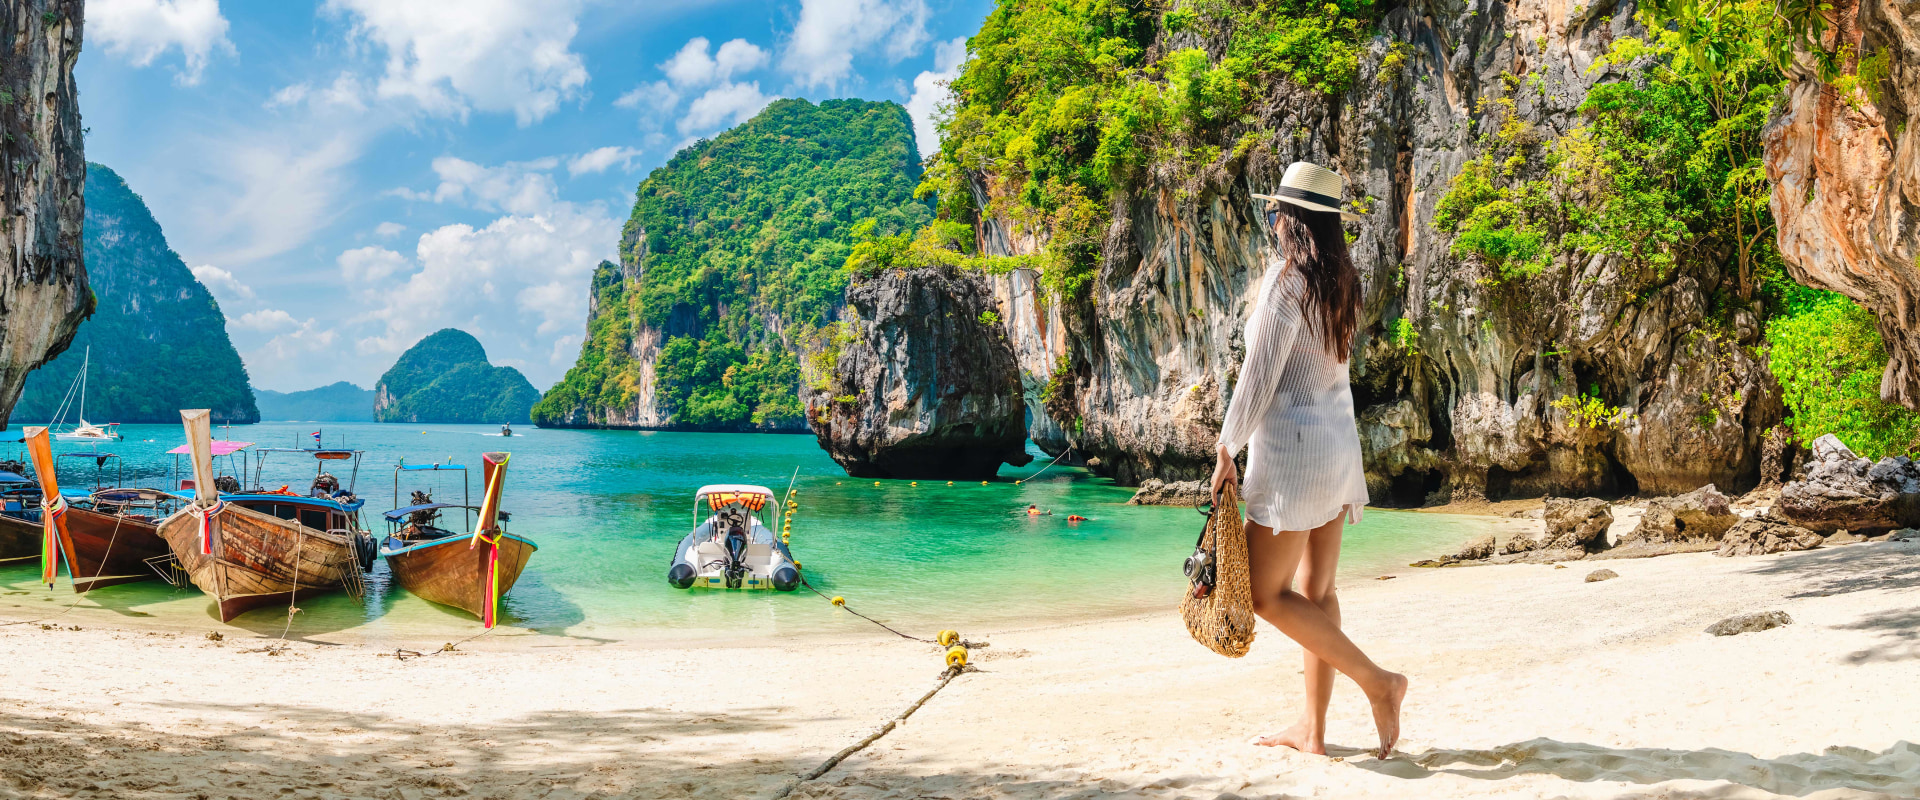 Top Asian Destinations for Your Next Vacation